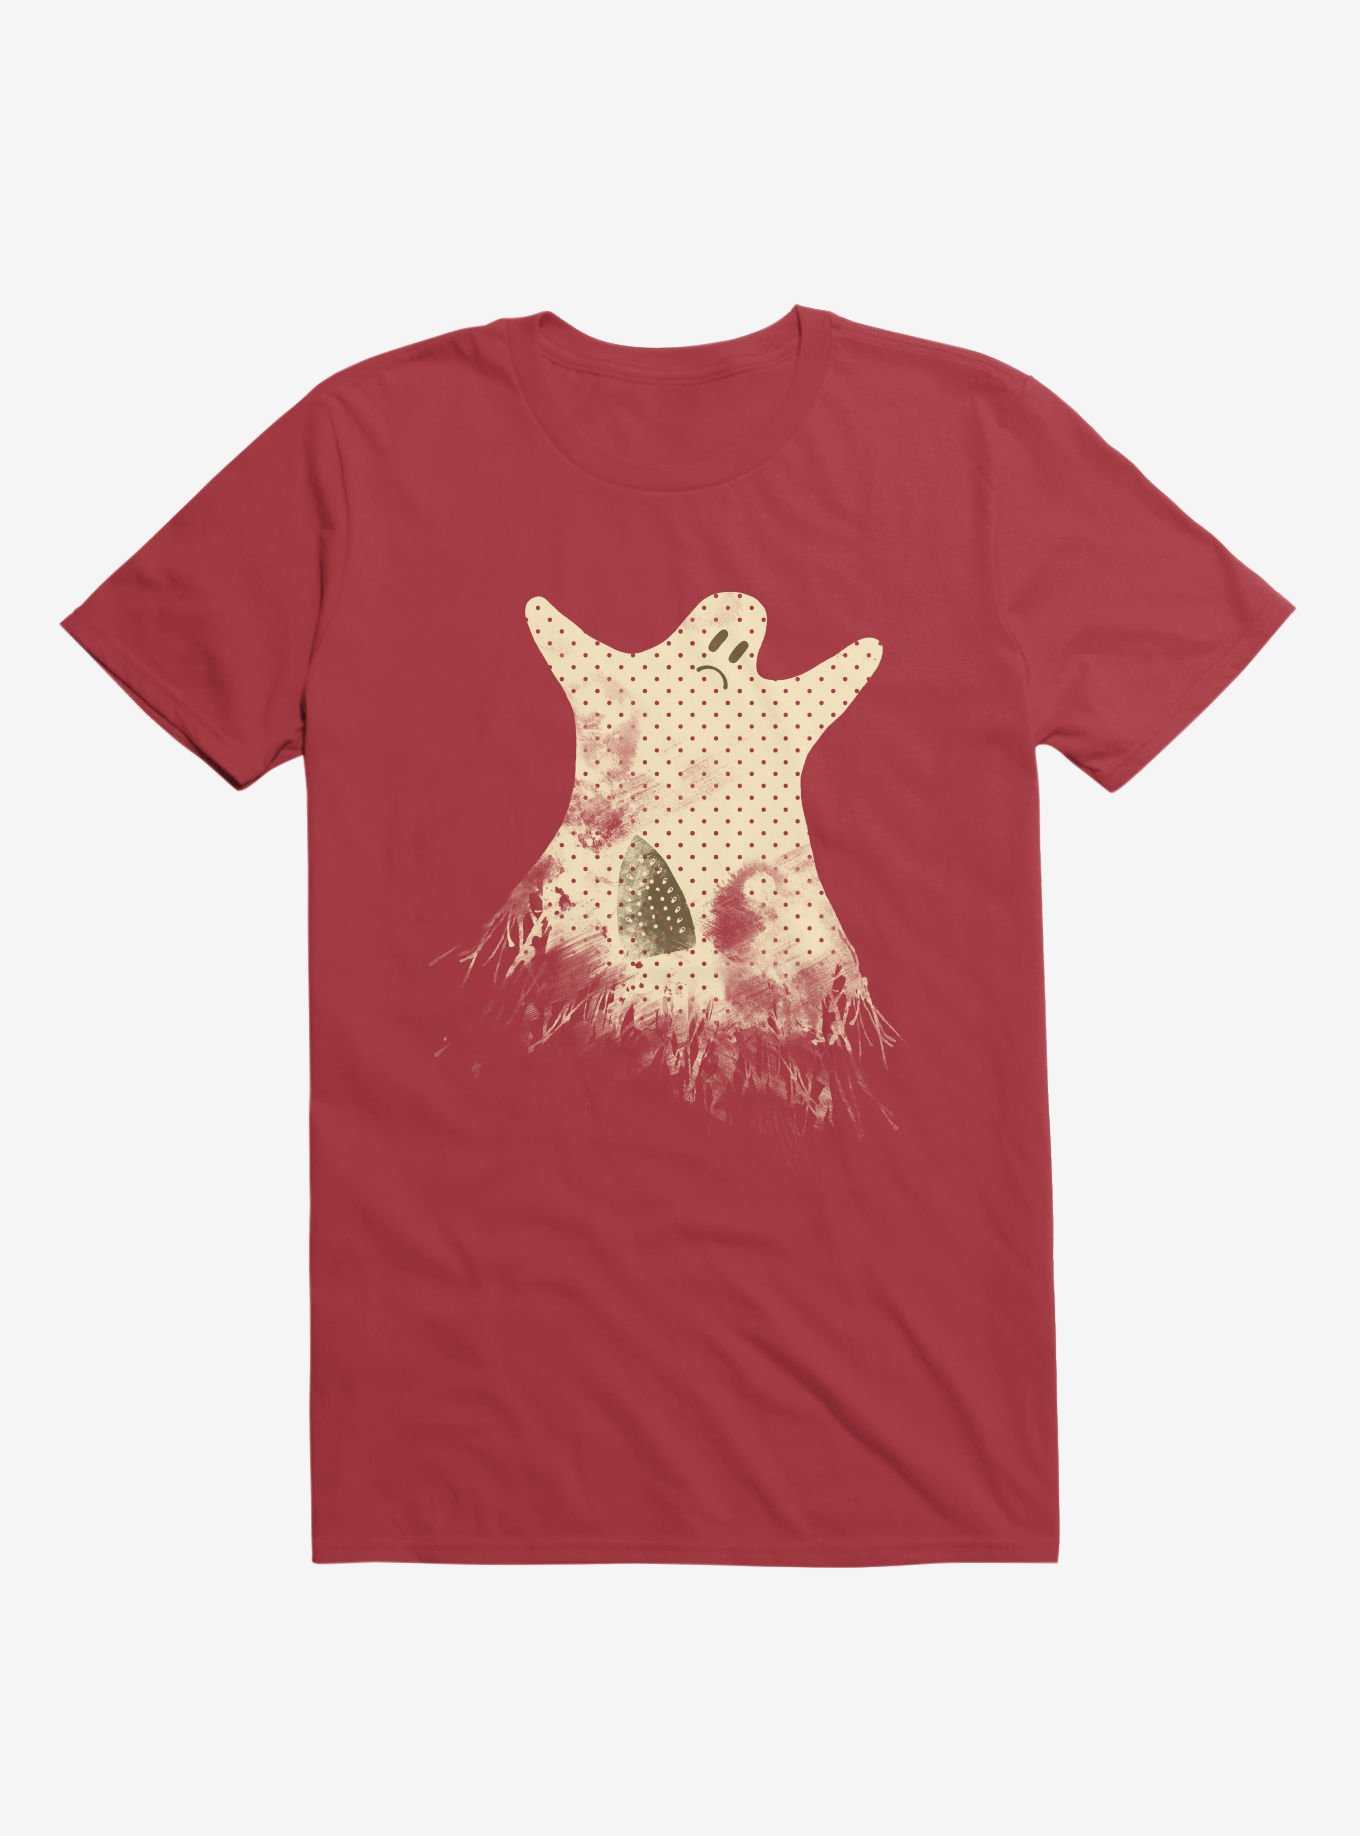 Used To Be Scarier Ghost T-Shirt, , hi-res